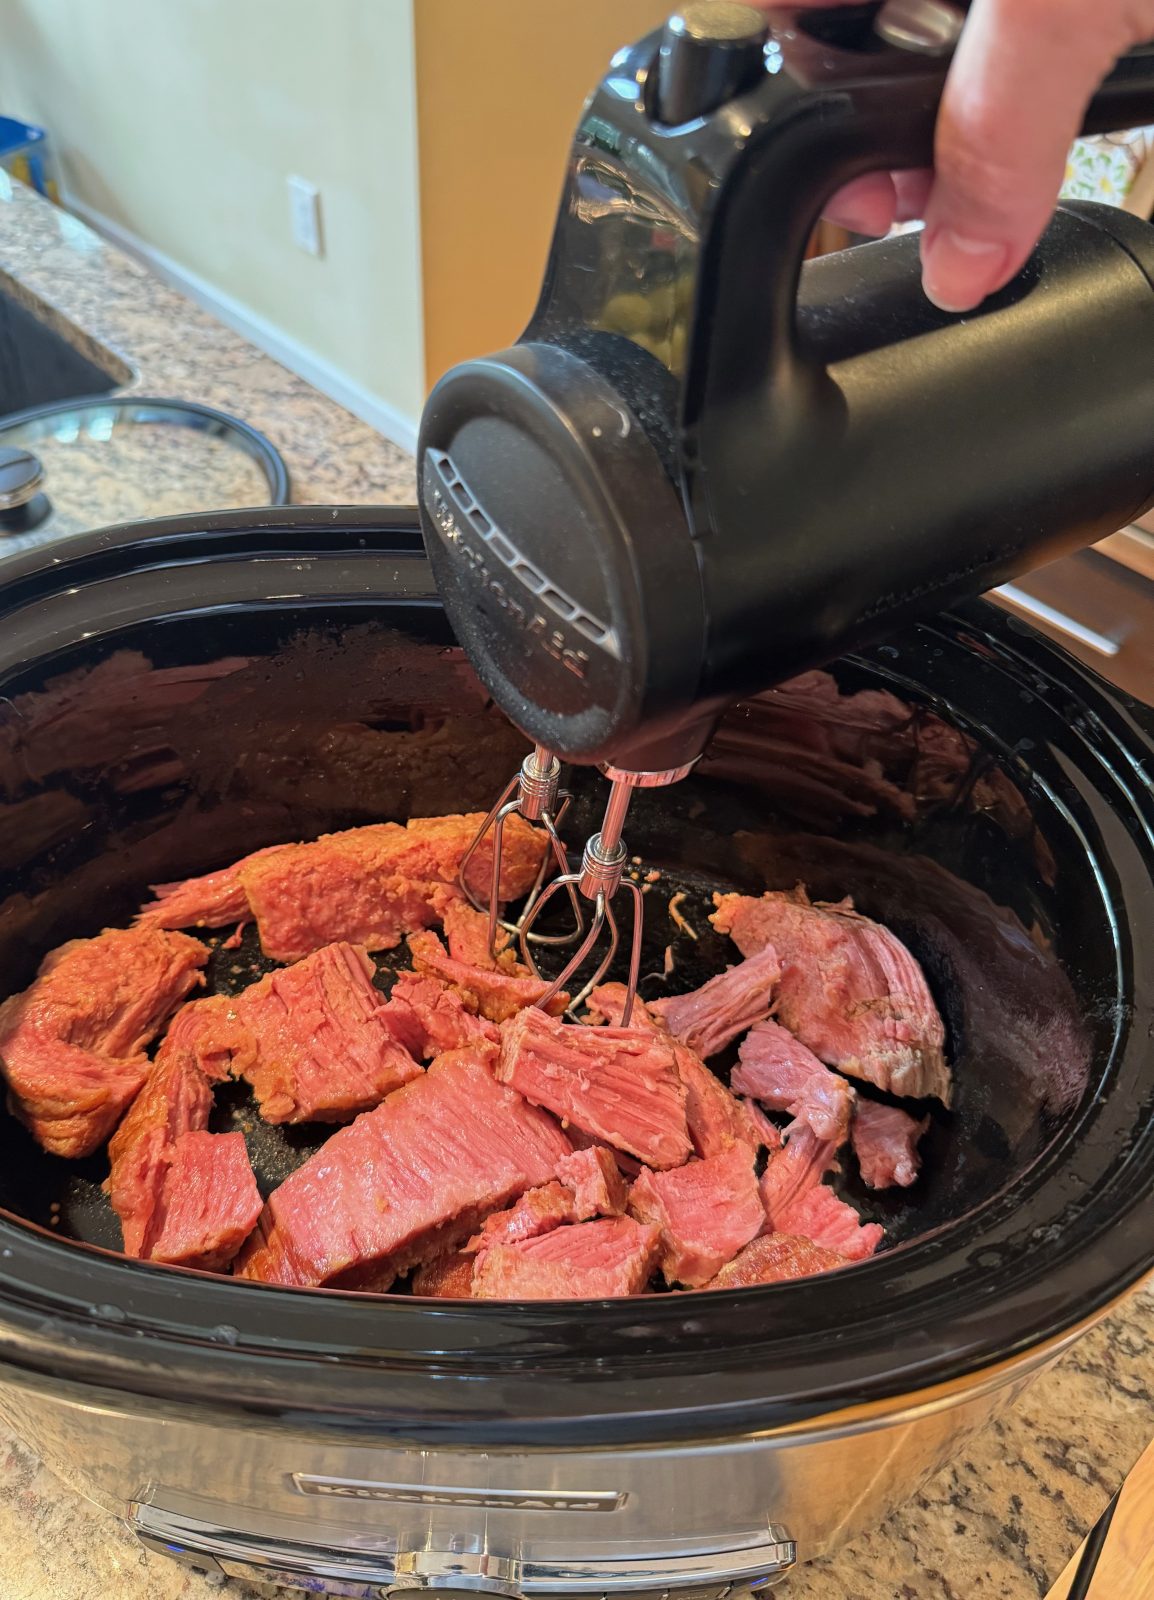 Starting to make Slow Cooker Reuben Dip.  I have 1 pound of cooked corned beef pieces in a black slow cooker with black cordless KitchenAid hand mixer getting ready to shred the corned beef.
